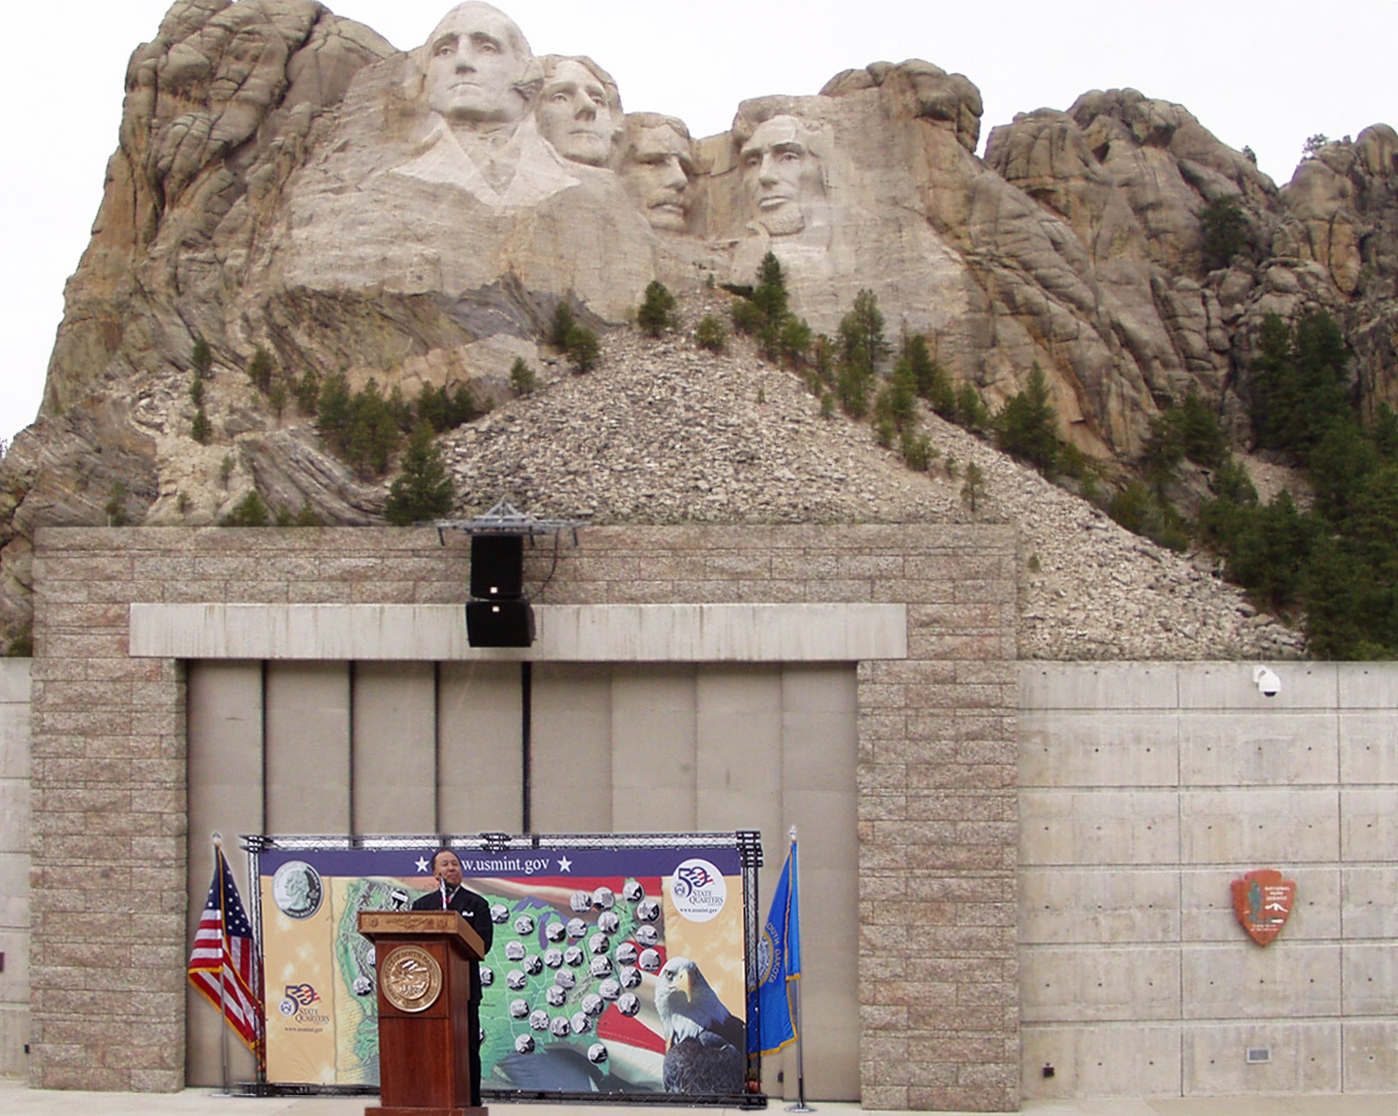 Sharing remarks at the Mount Rushmore Amphitheater under the watchful eyes of Presidents Washington, Jefferson, Roosevelt, and Lincoln.